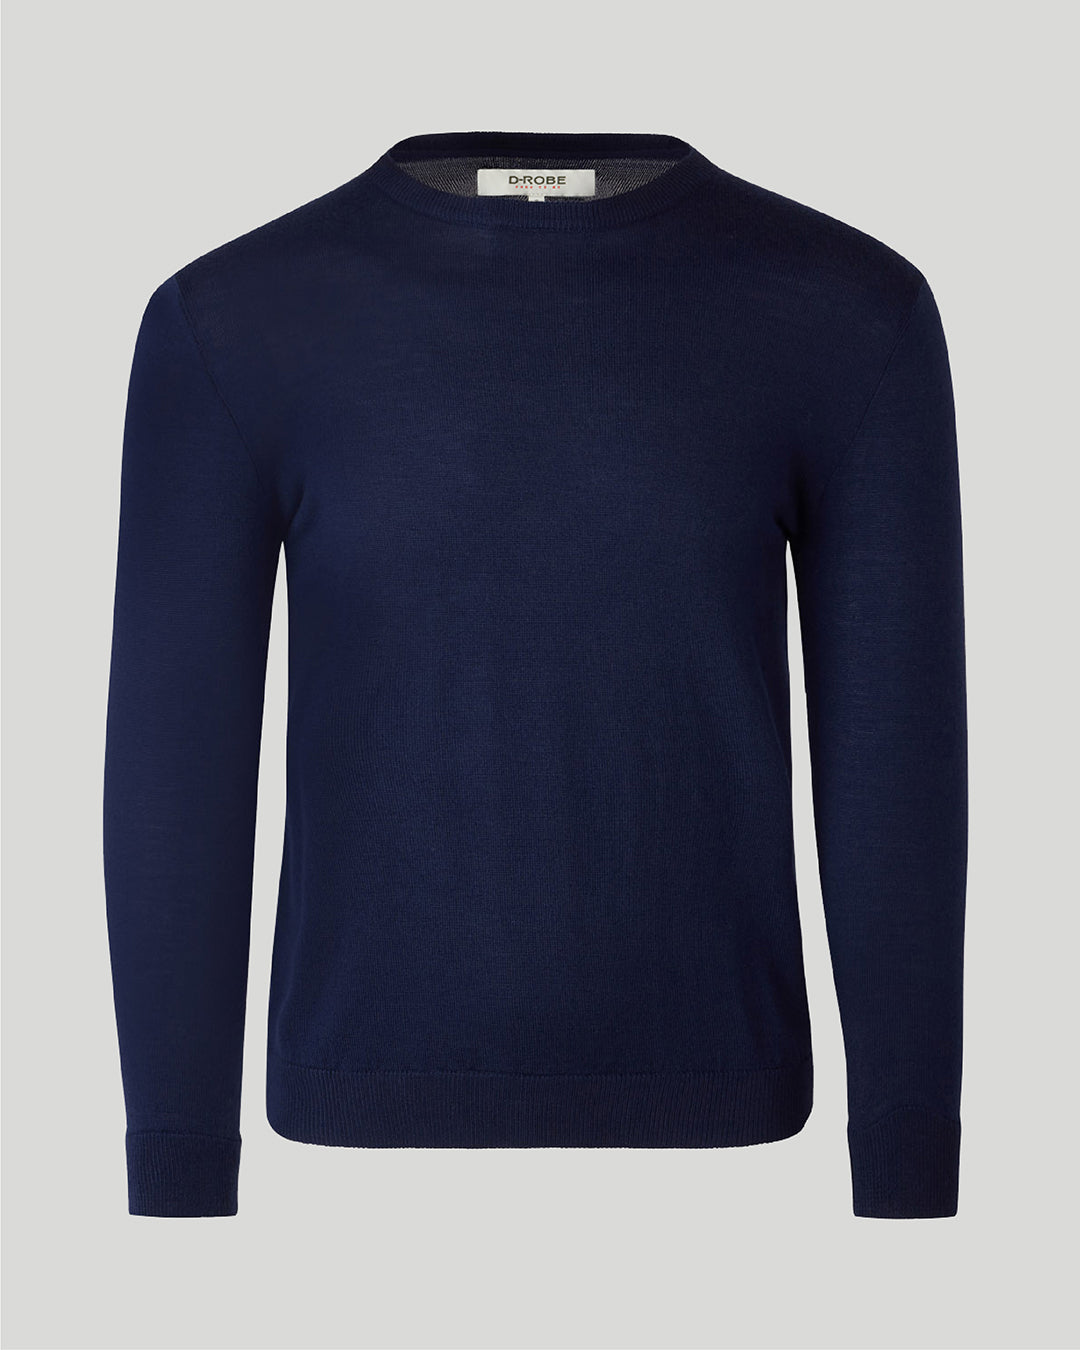 Image of our merino wool crew neck jumper in navy for men are made from a lightweight fabric and reactive natural fibre.